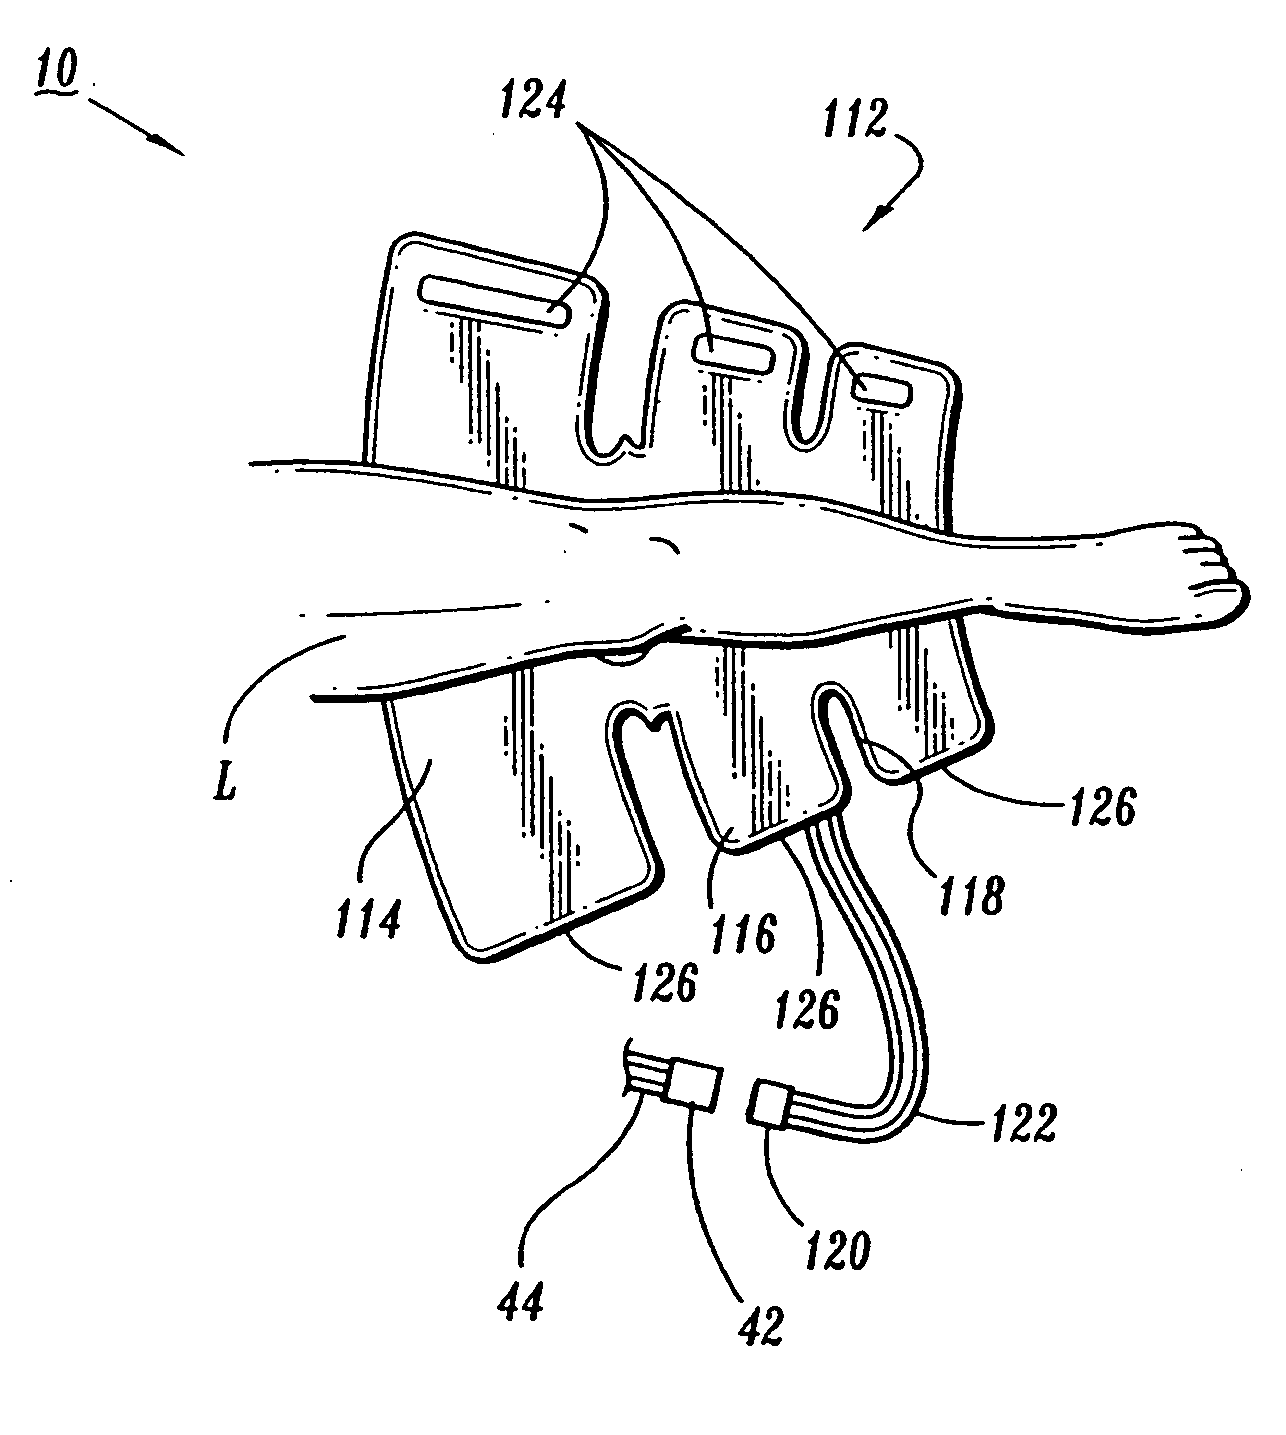 Garment detection method and system for delivering compression treatment